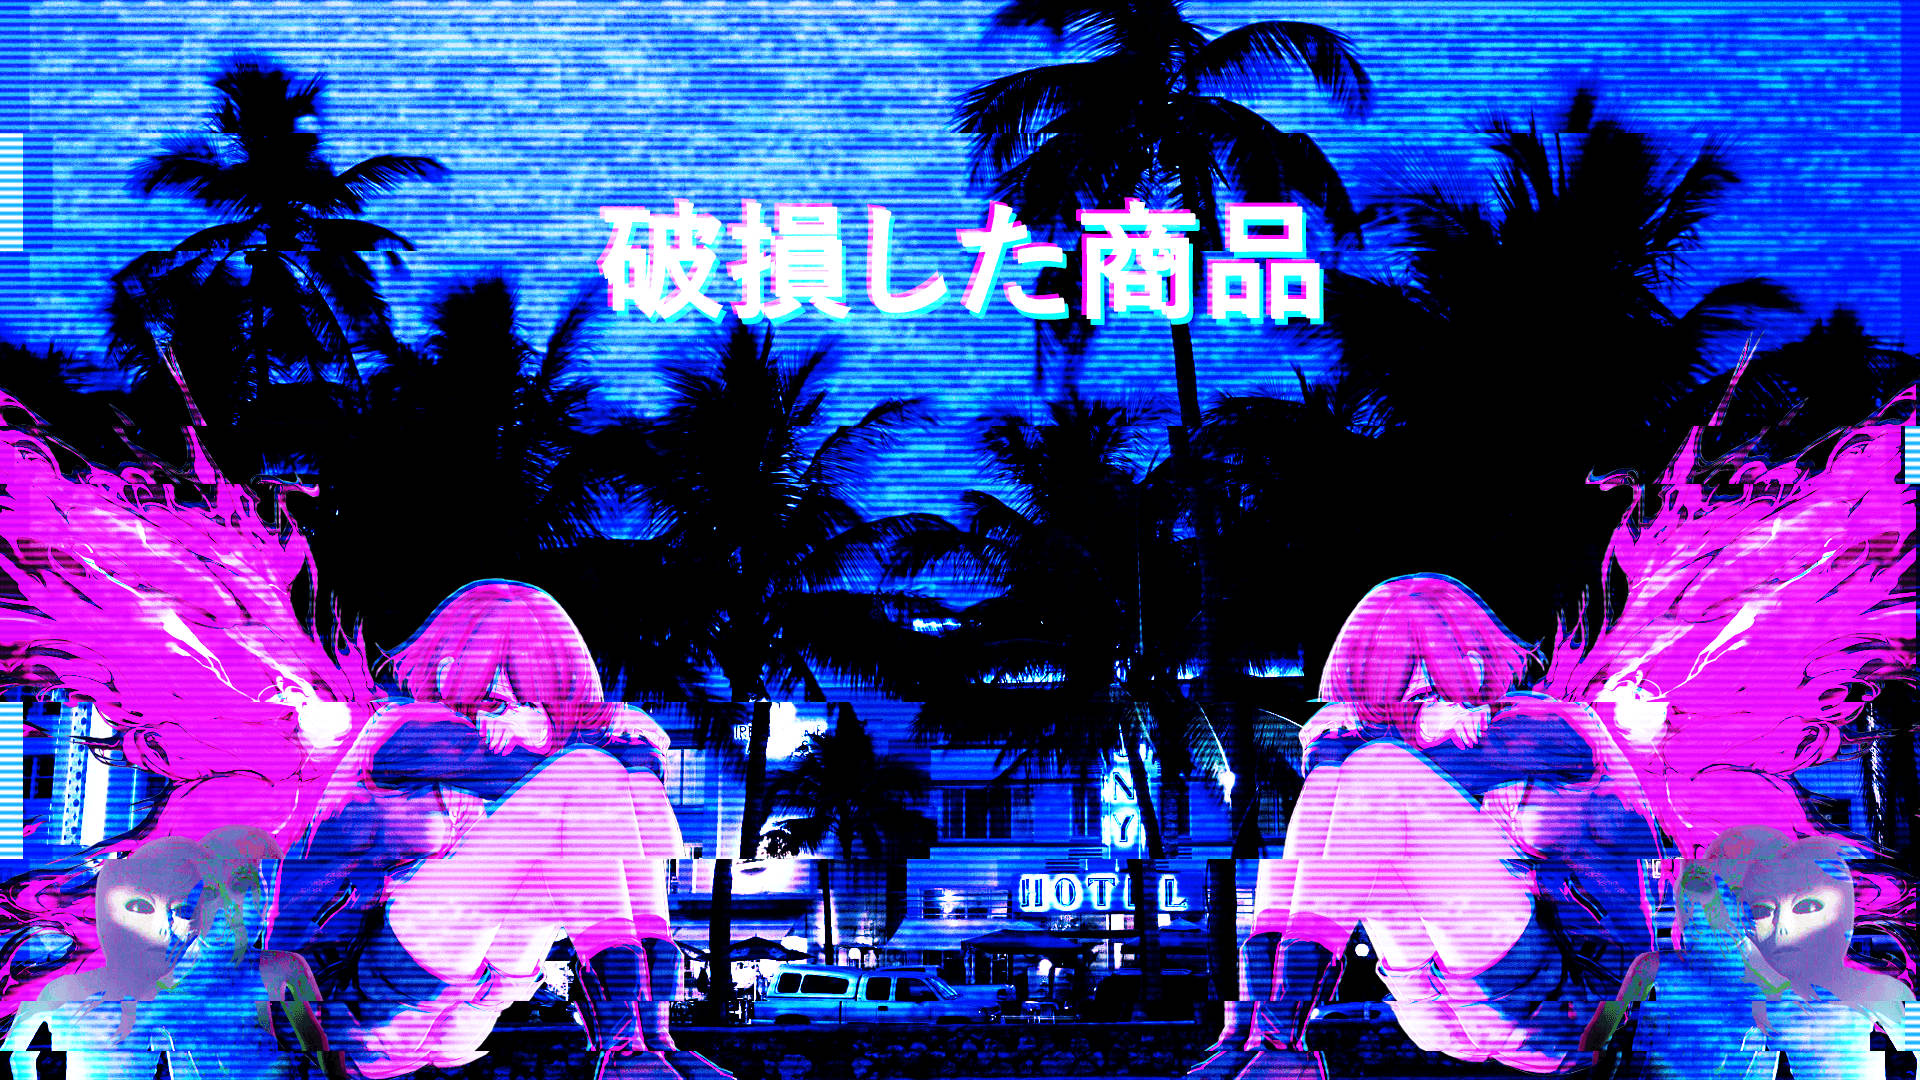 Blue Anime Pink-winged Girl Aesthetic Background